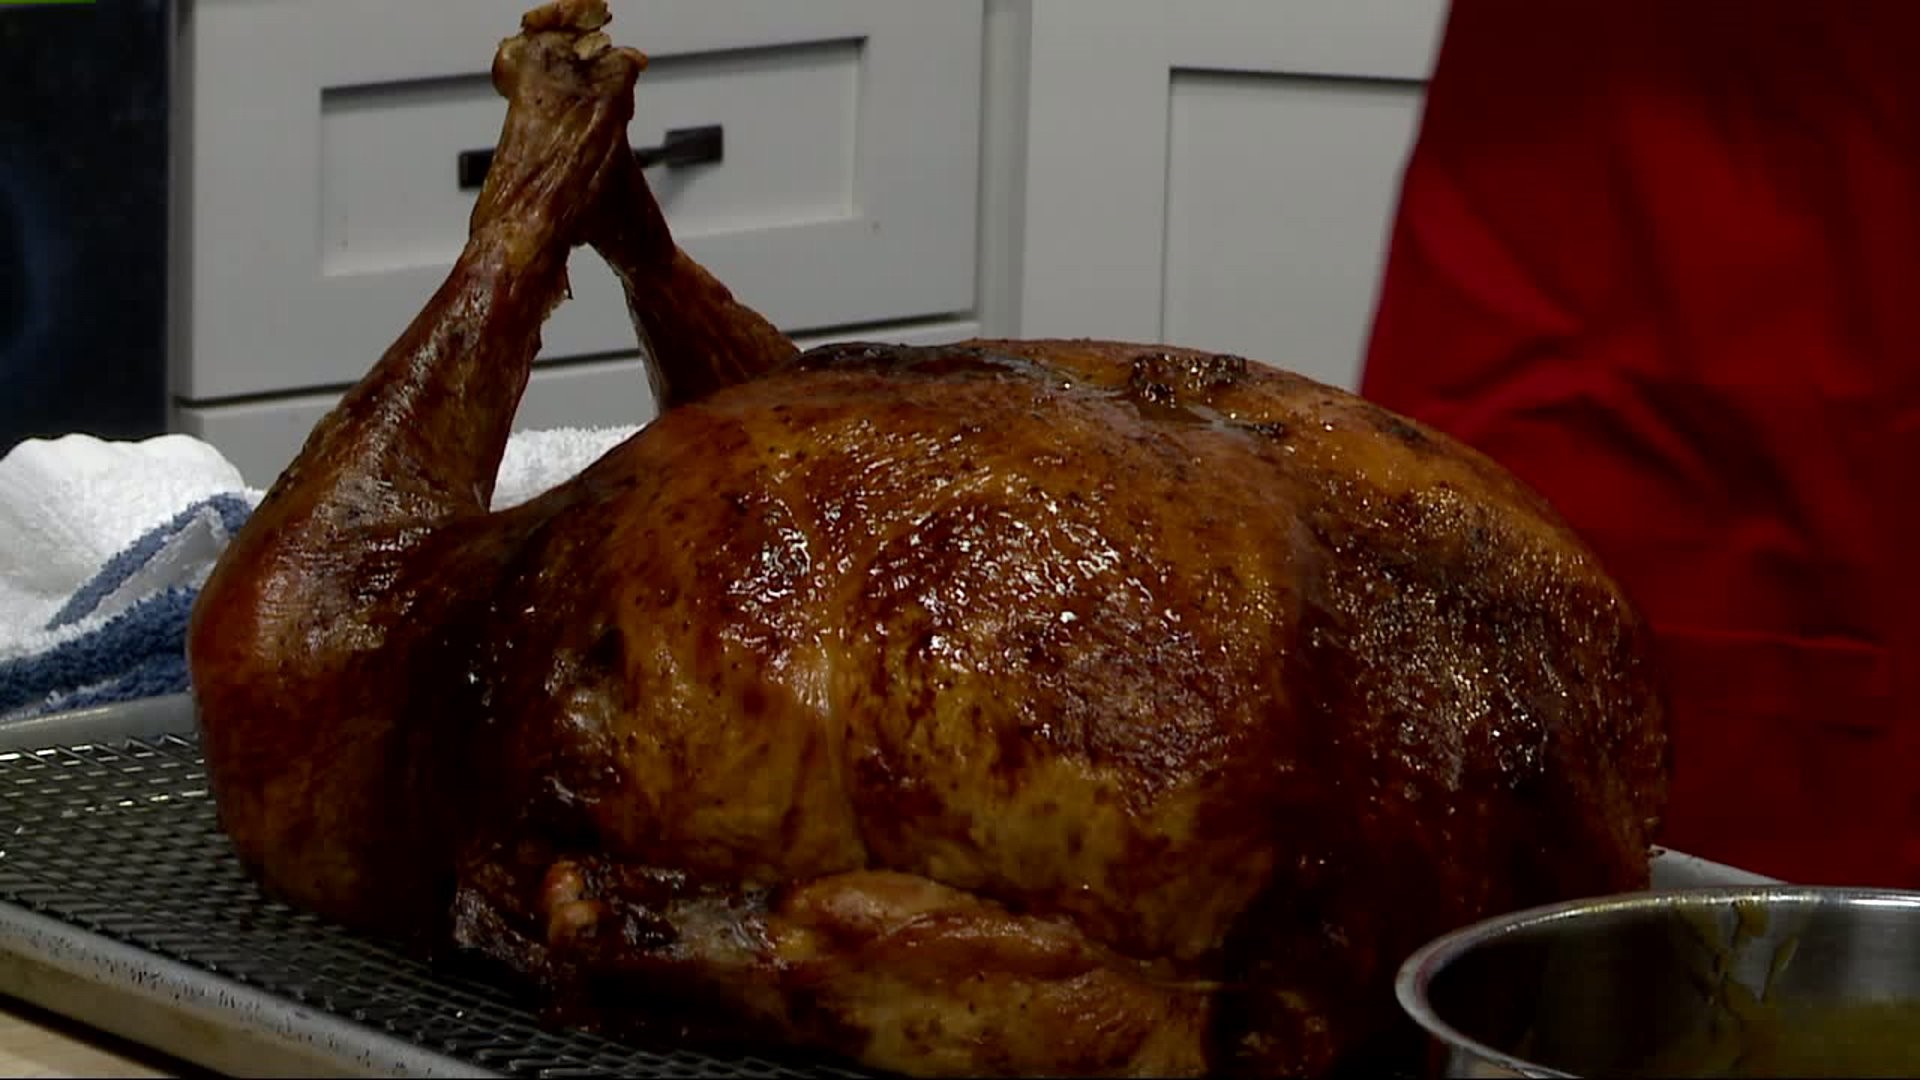 Members 1st and The Left Bank Restaurant cook Turducken in FOX43 Kitchen, donate it to York County Food Bank